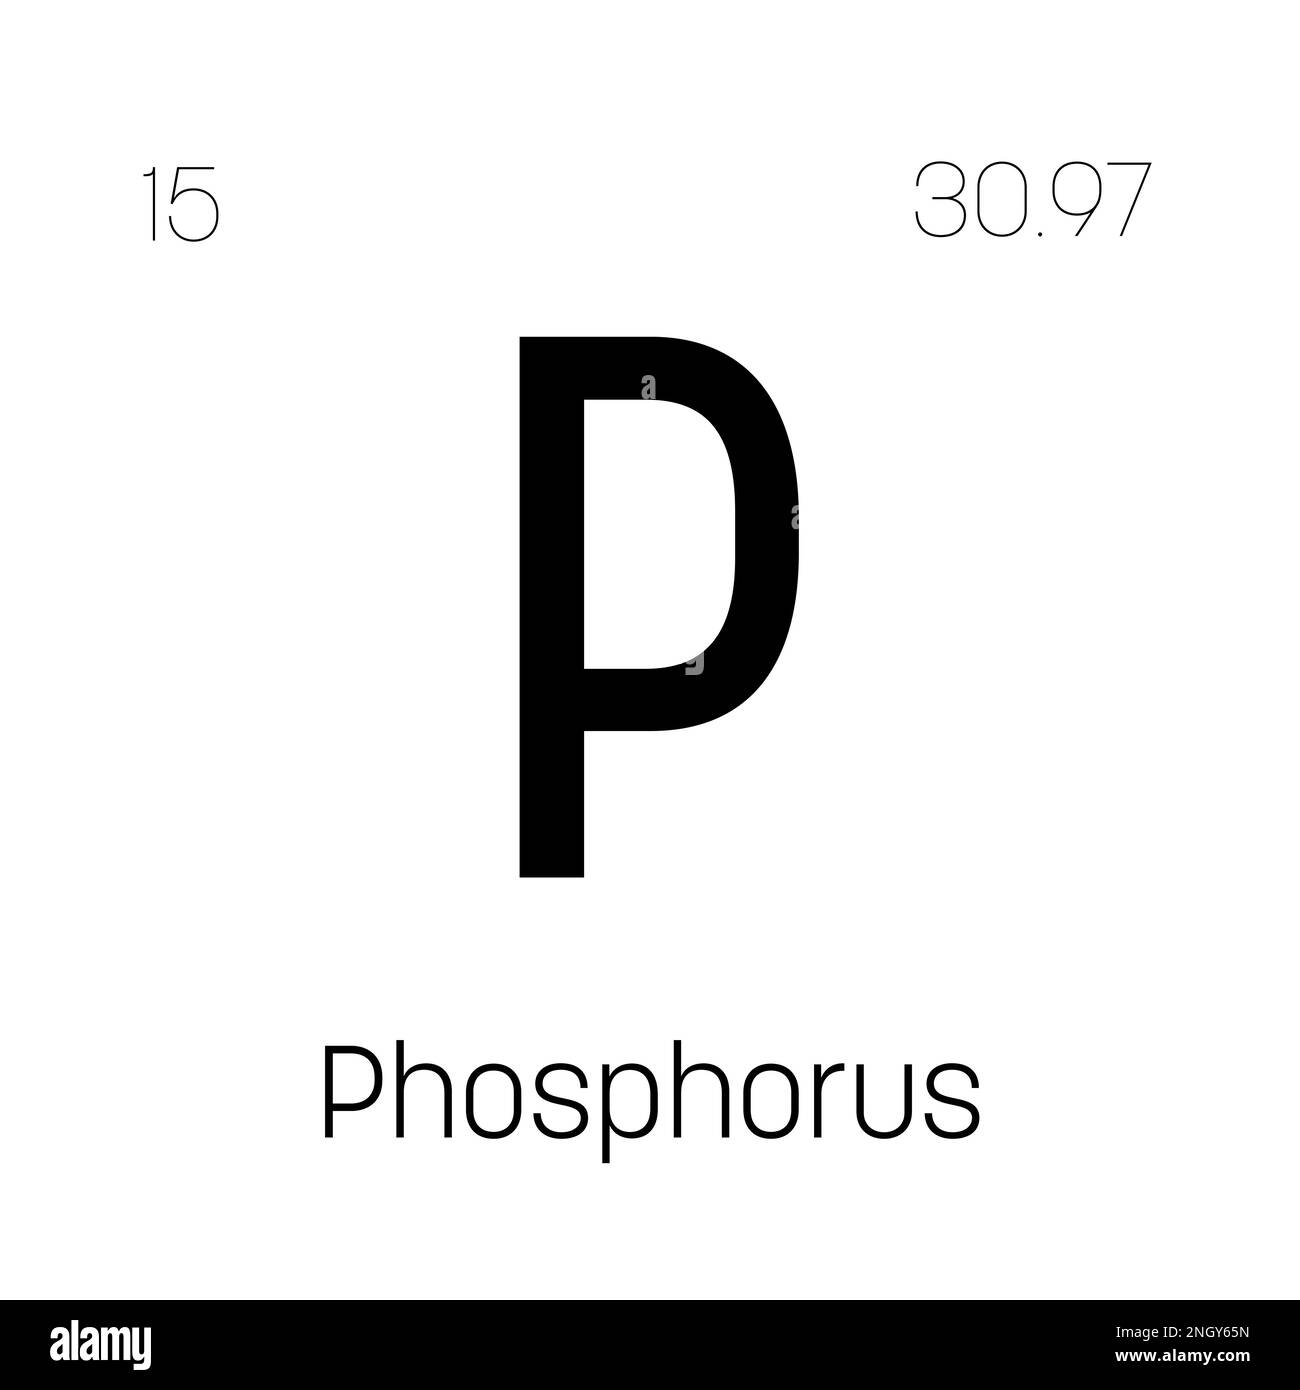 Phosphorus, P, periodic table element with name, symbol, atomic number and weight. Non-metal with various industrial uses, such as in fertilizer, detergents, and as a component of certain types of explosives. Stock Vector